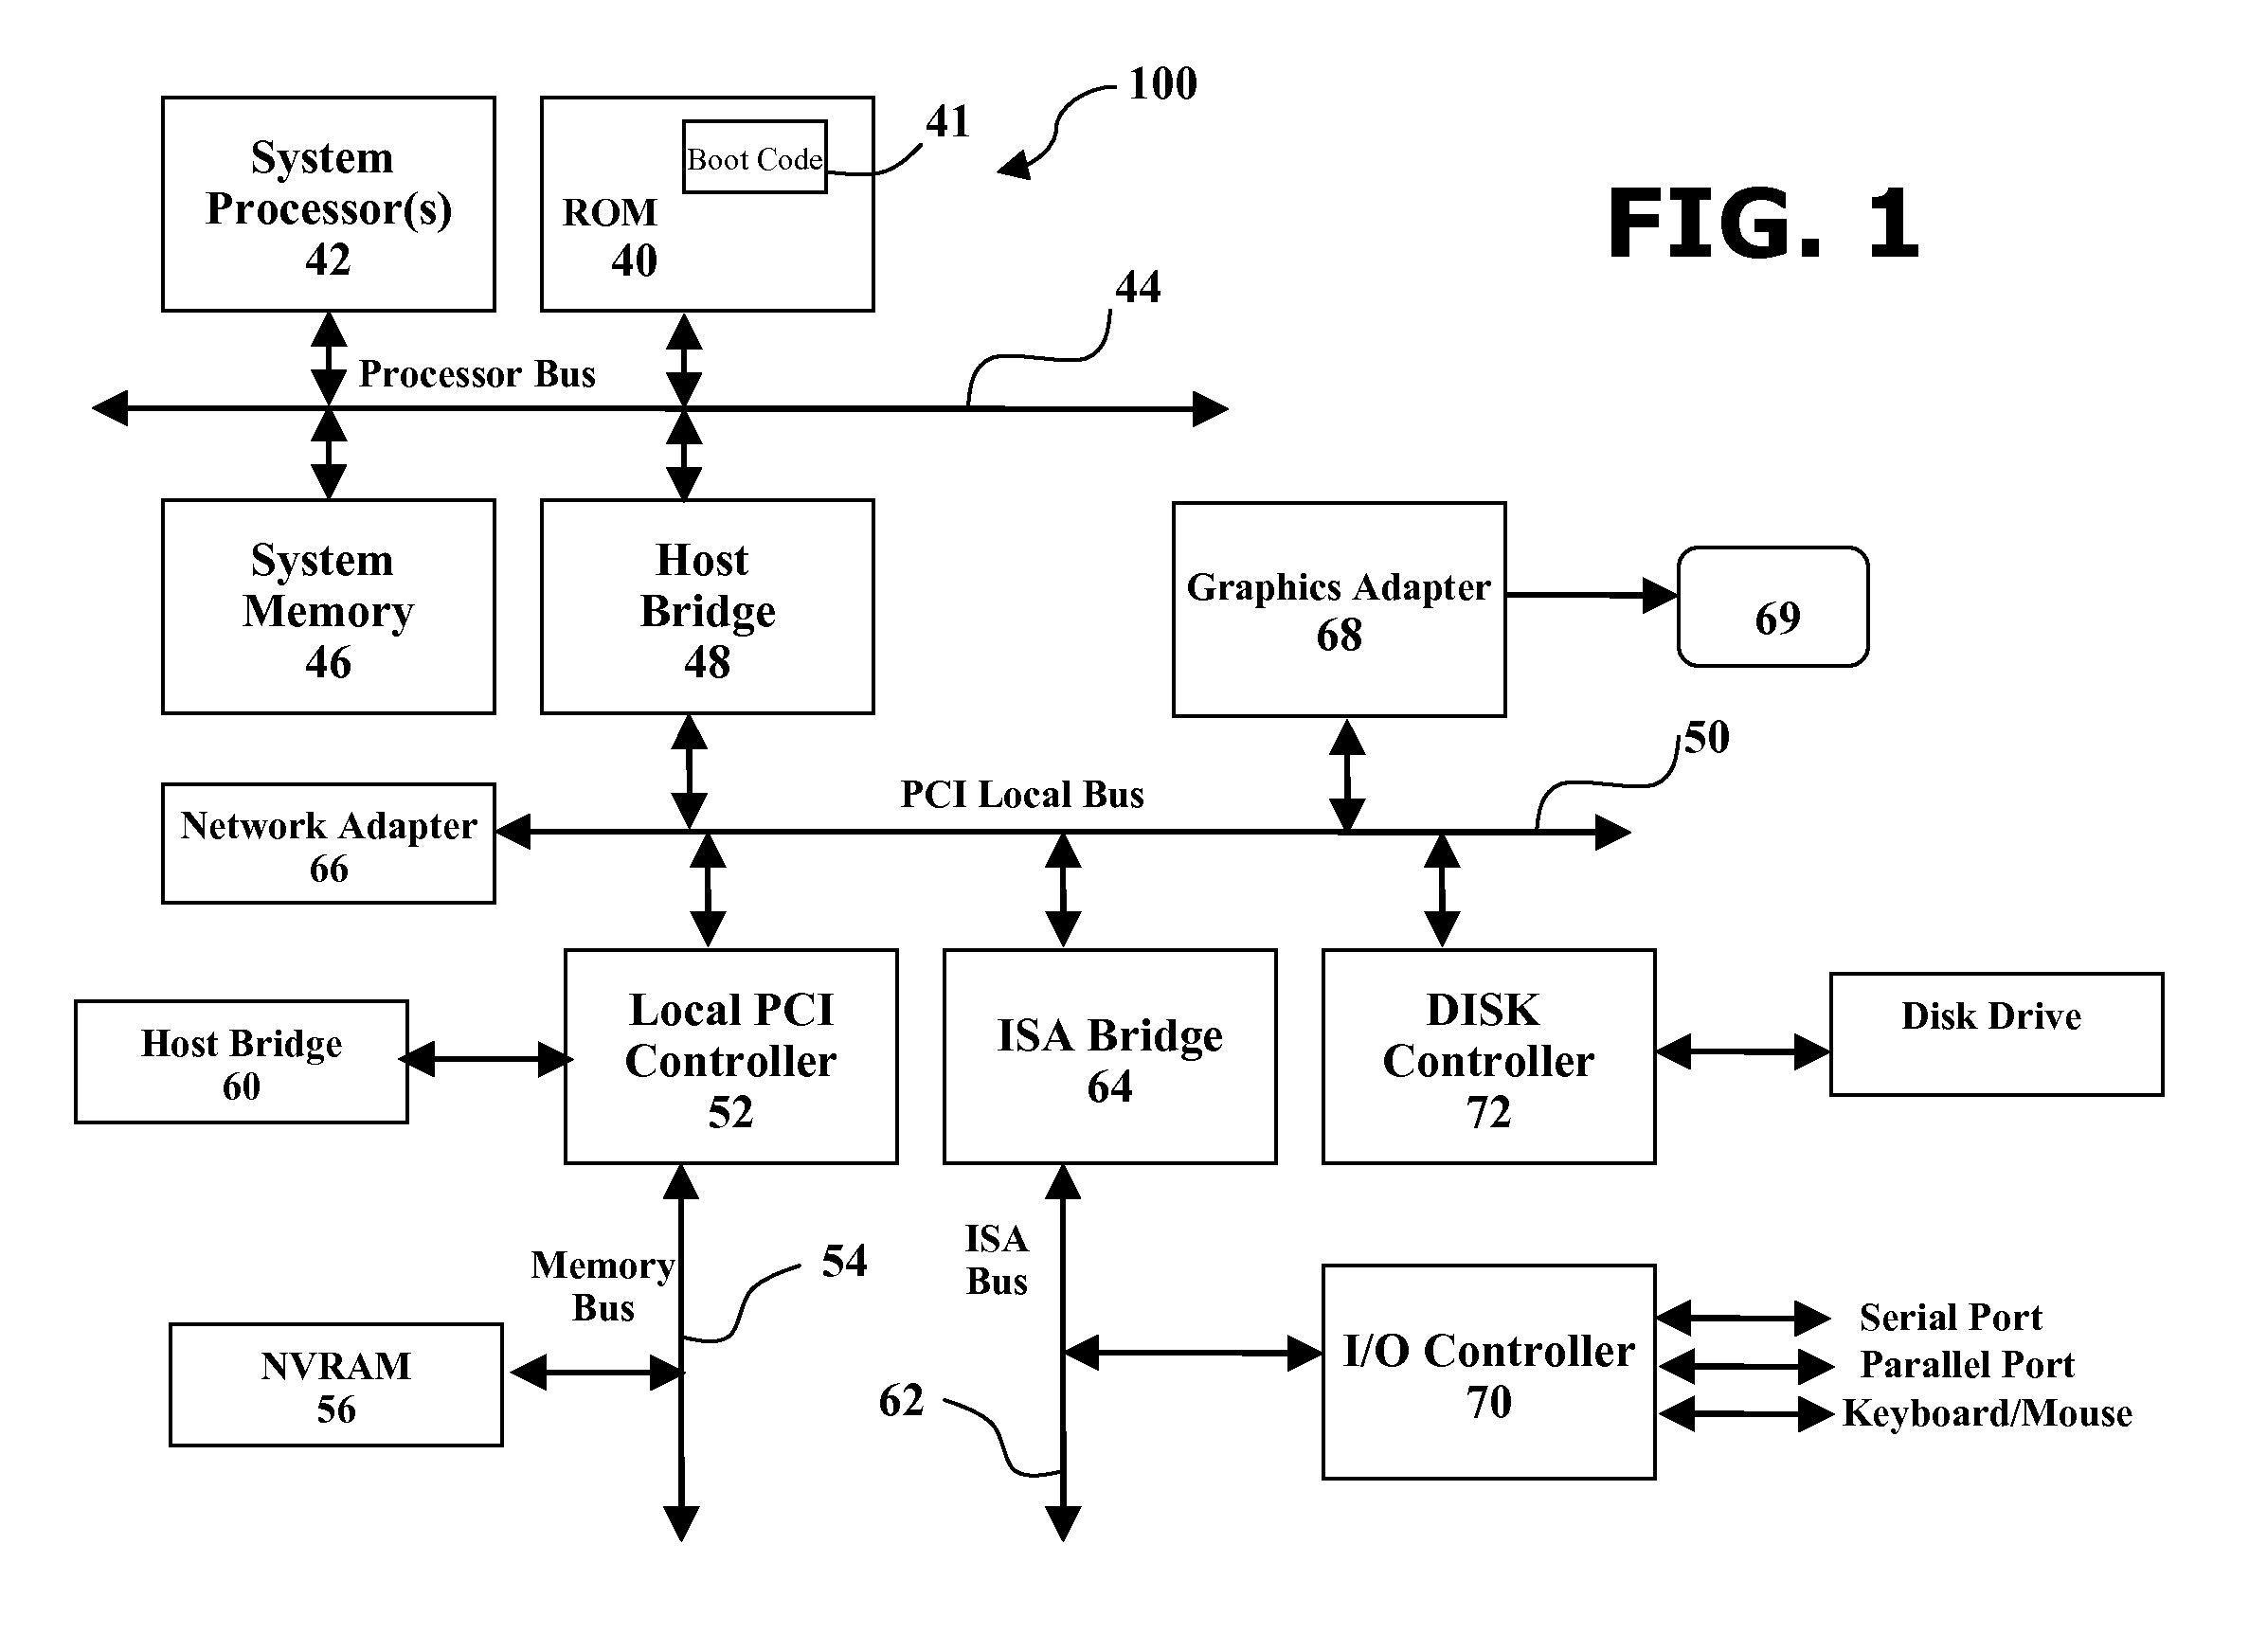 Method and Apparatus for Locating Input-Model Faults Using Dynamic Tainting